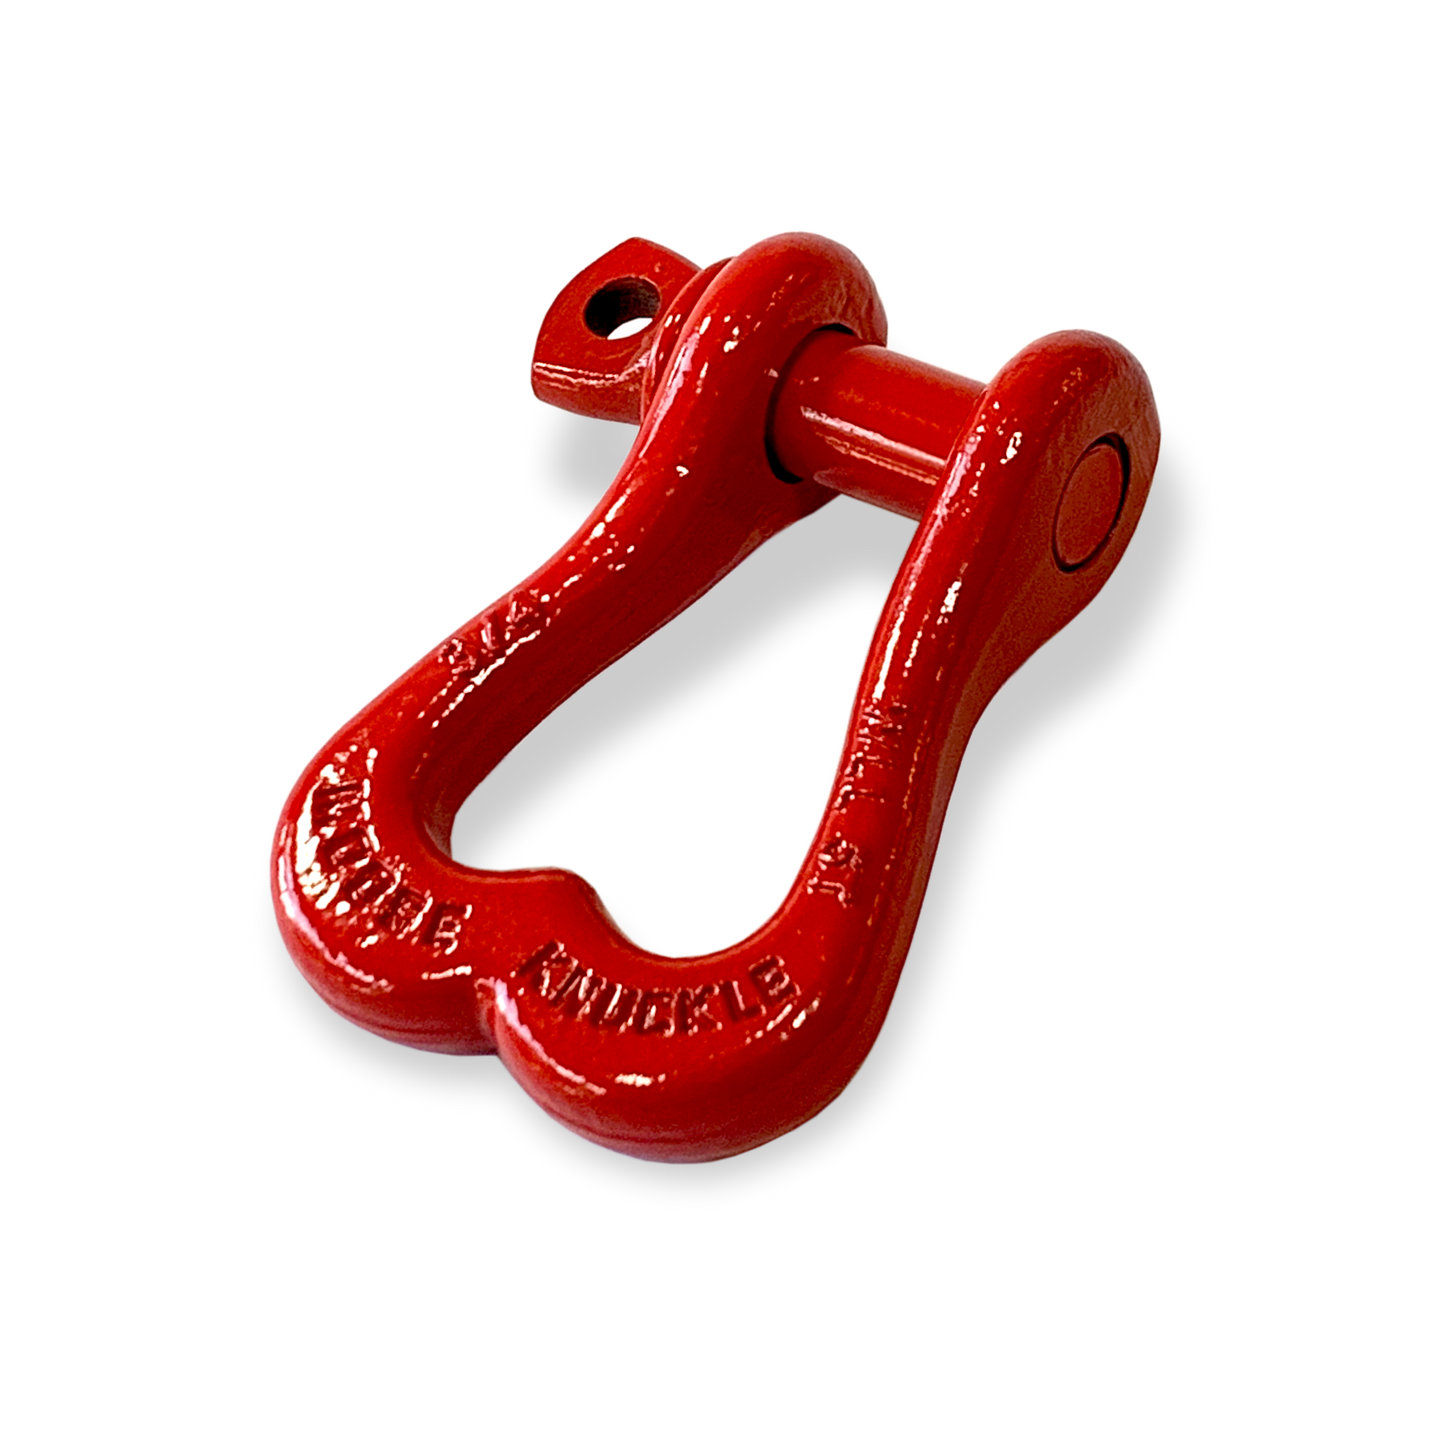 Moose Knuckle XL Flame Red Powder Coated Colored Shackle for Tow Straps, Off Roading and Truck Nuts Vehicle Recovery